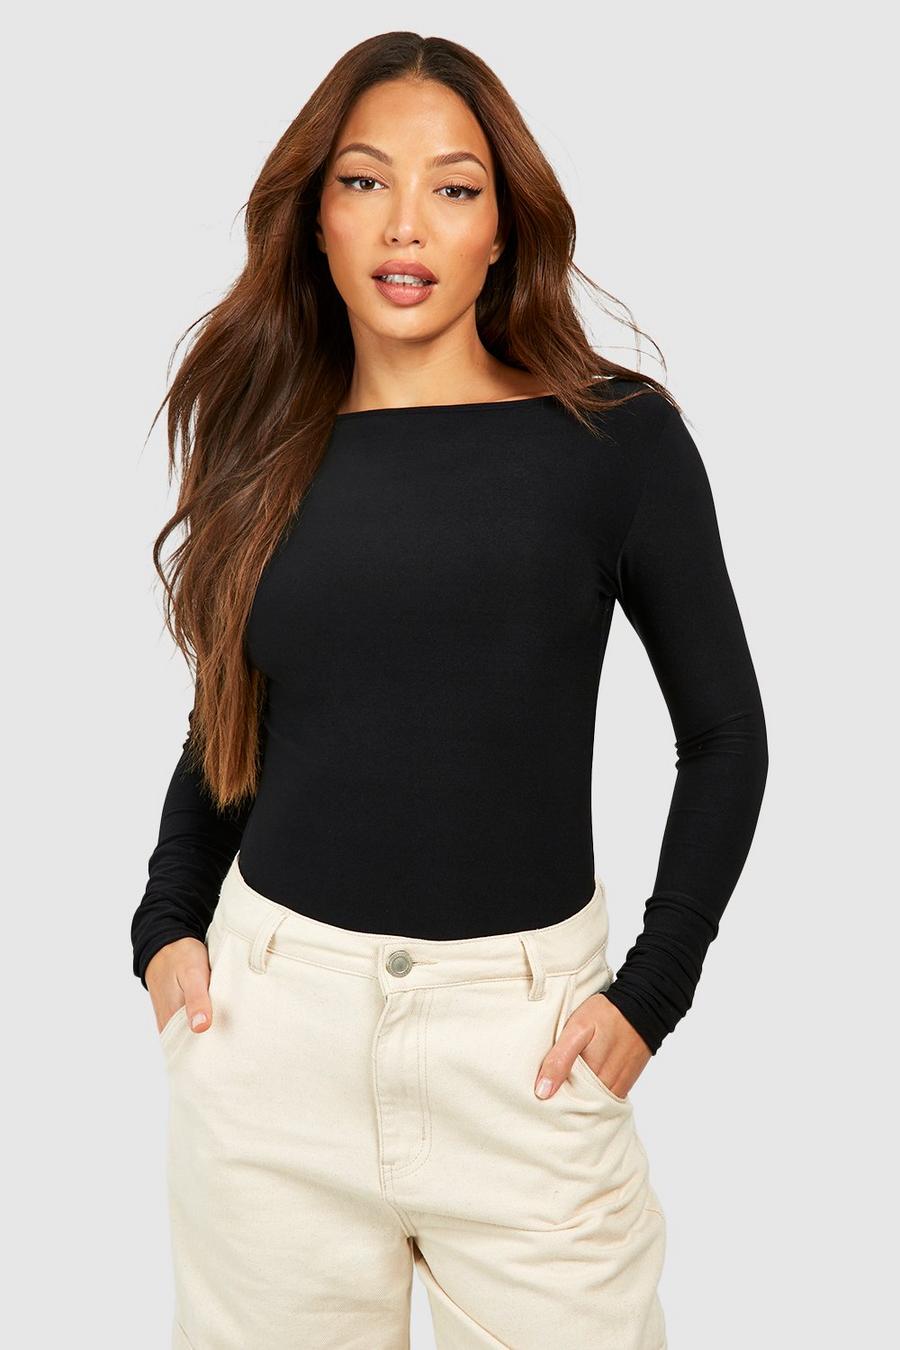 Black Tall Premium Soft Touch Boatneck Longsleeve Top